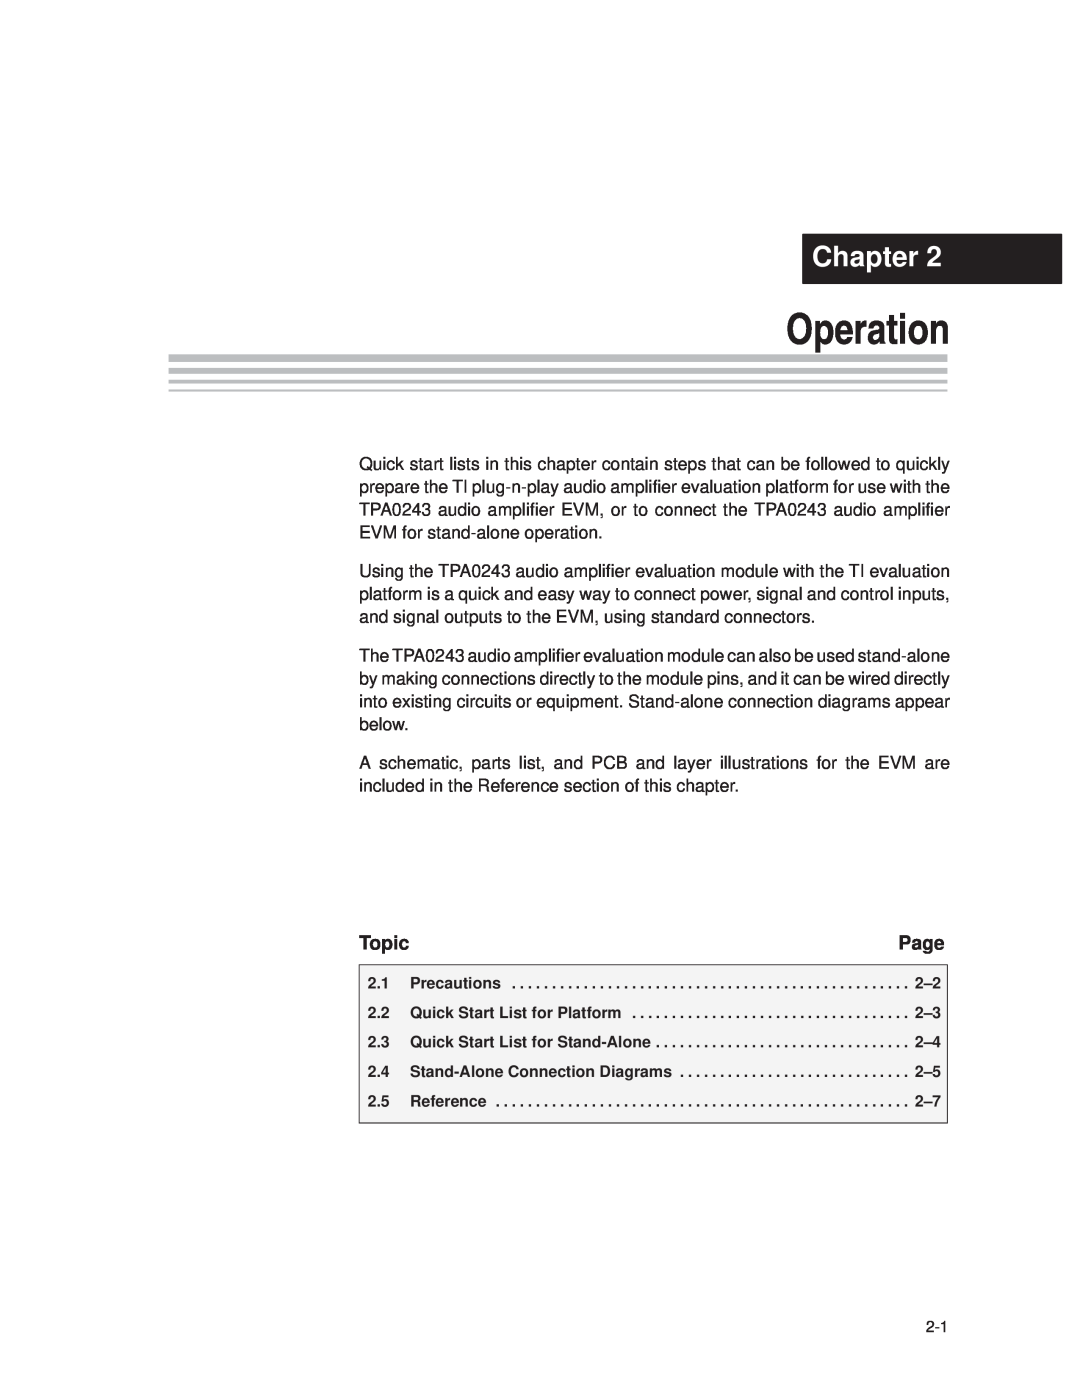 Texas Instruments TPA0243 manual Operation, Chapter, Page, Topic 